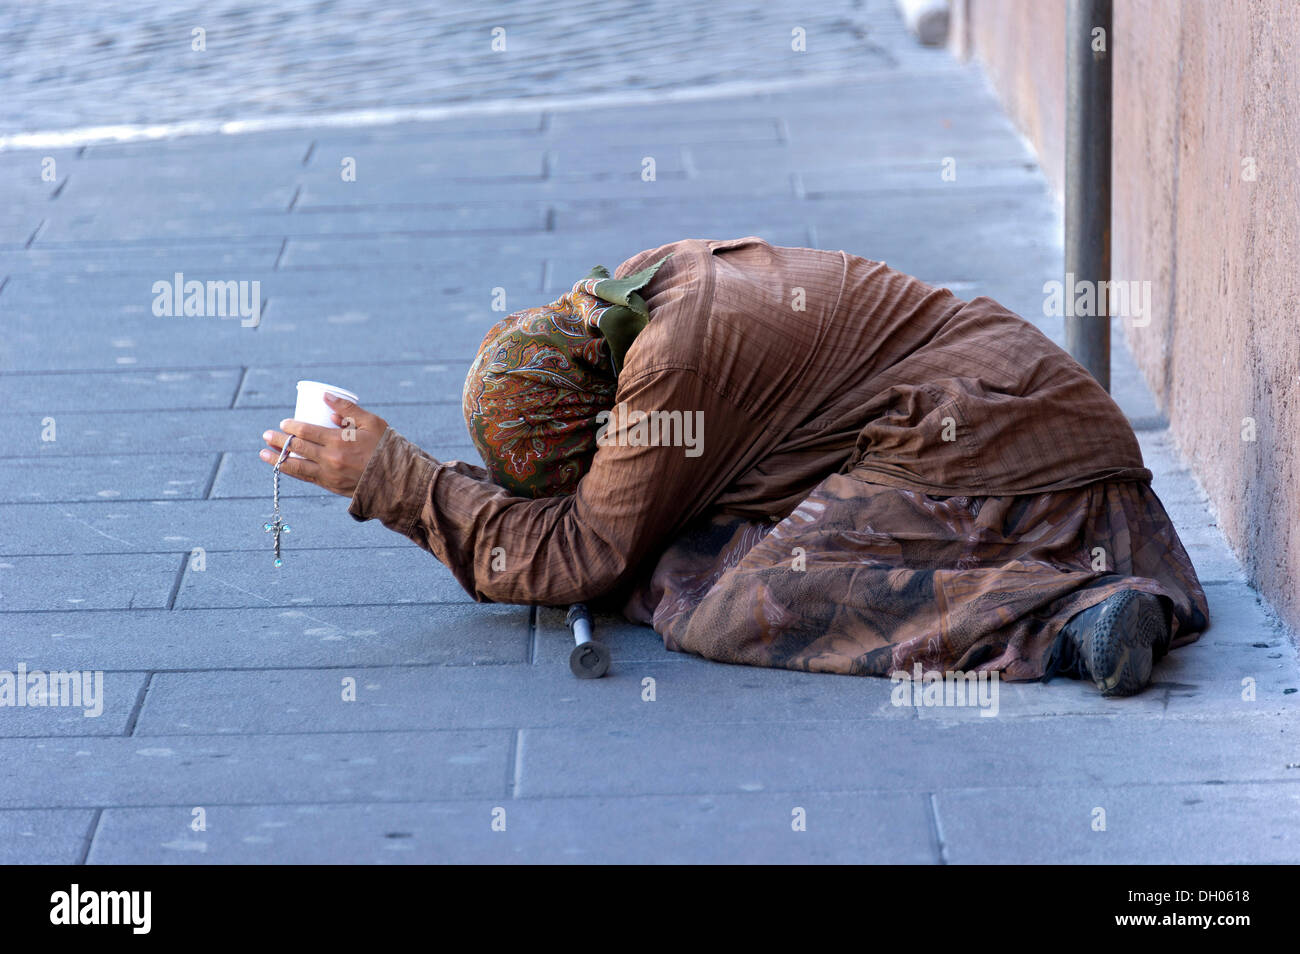 Female beggar holding a plastic cup in a street of the old town, Rome, Lazio, Italy Stock Photo